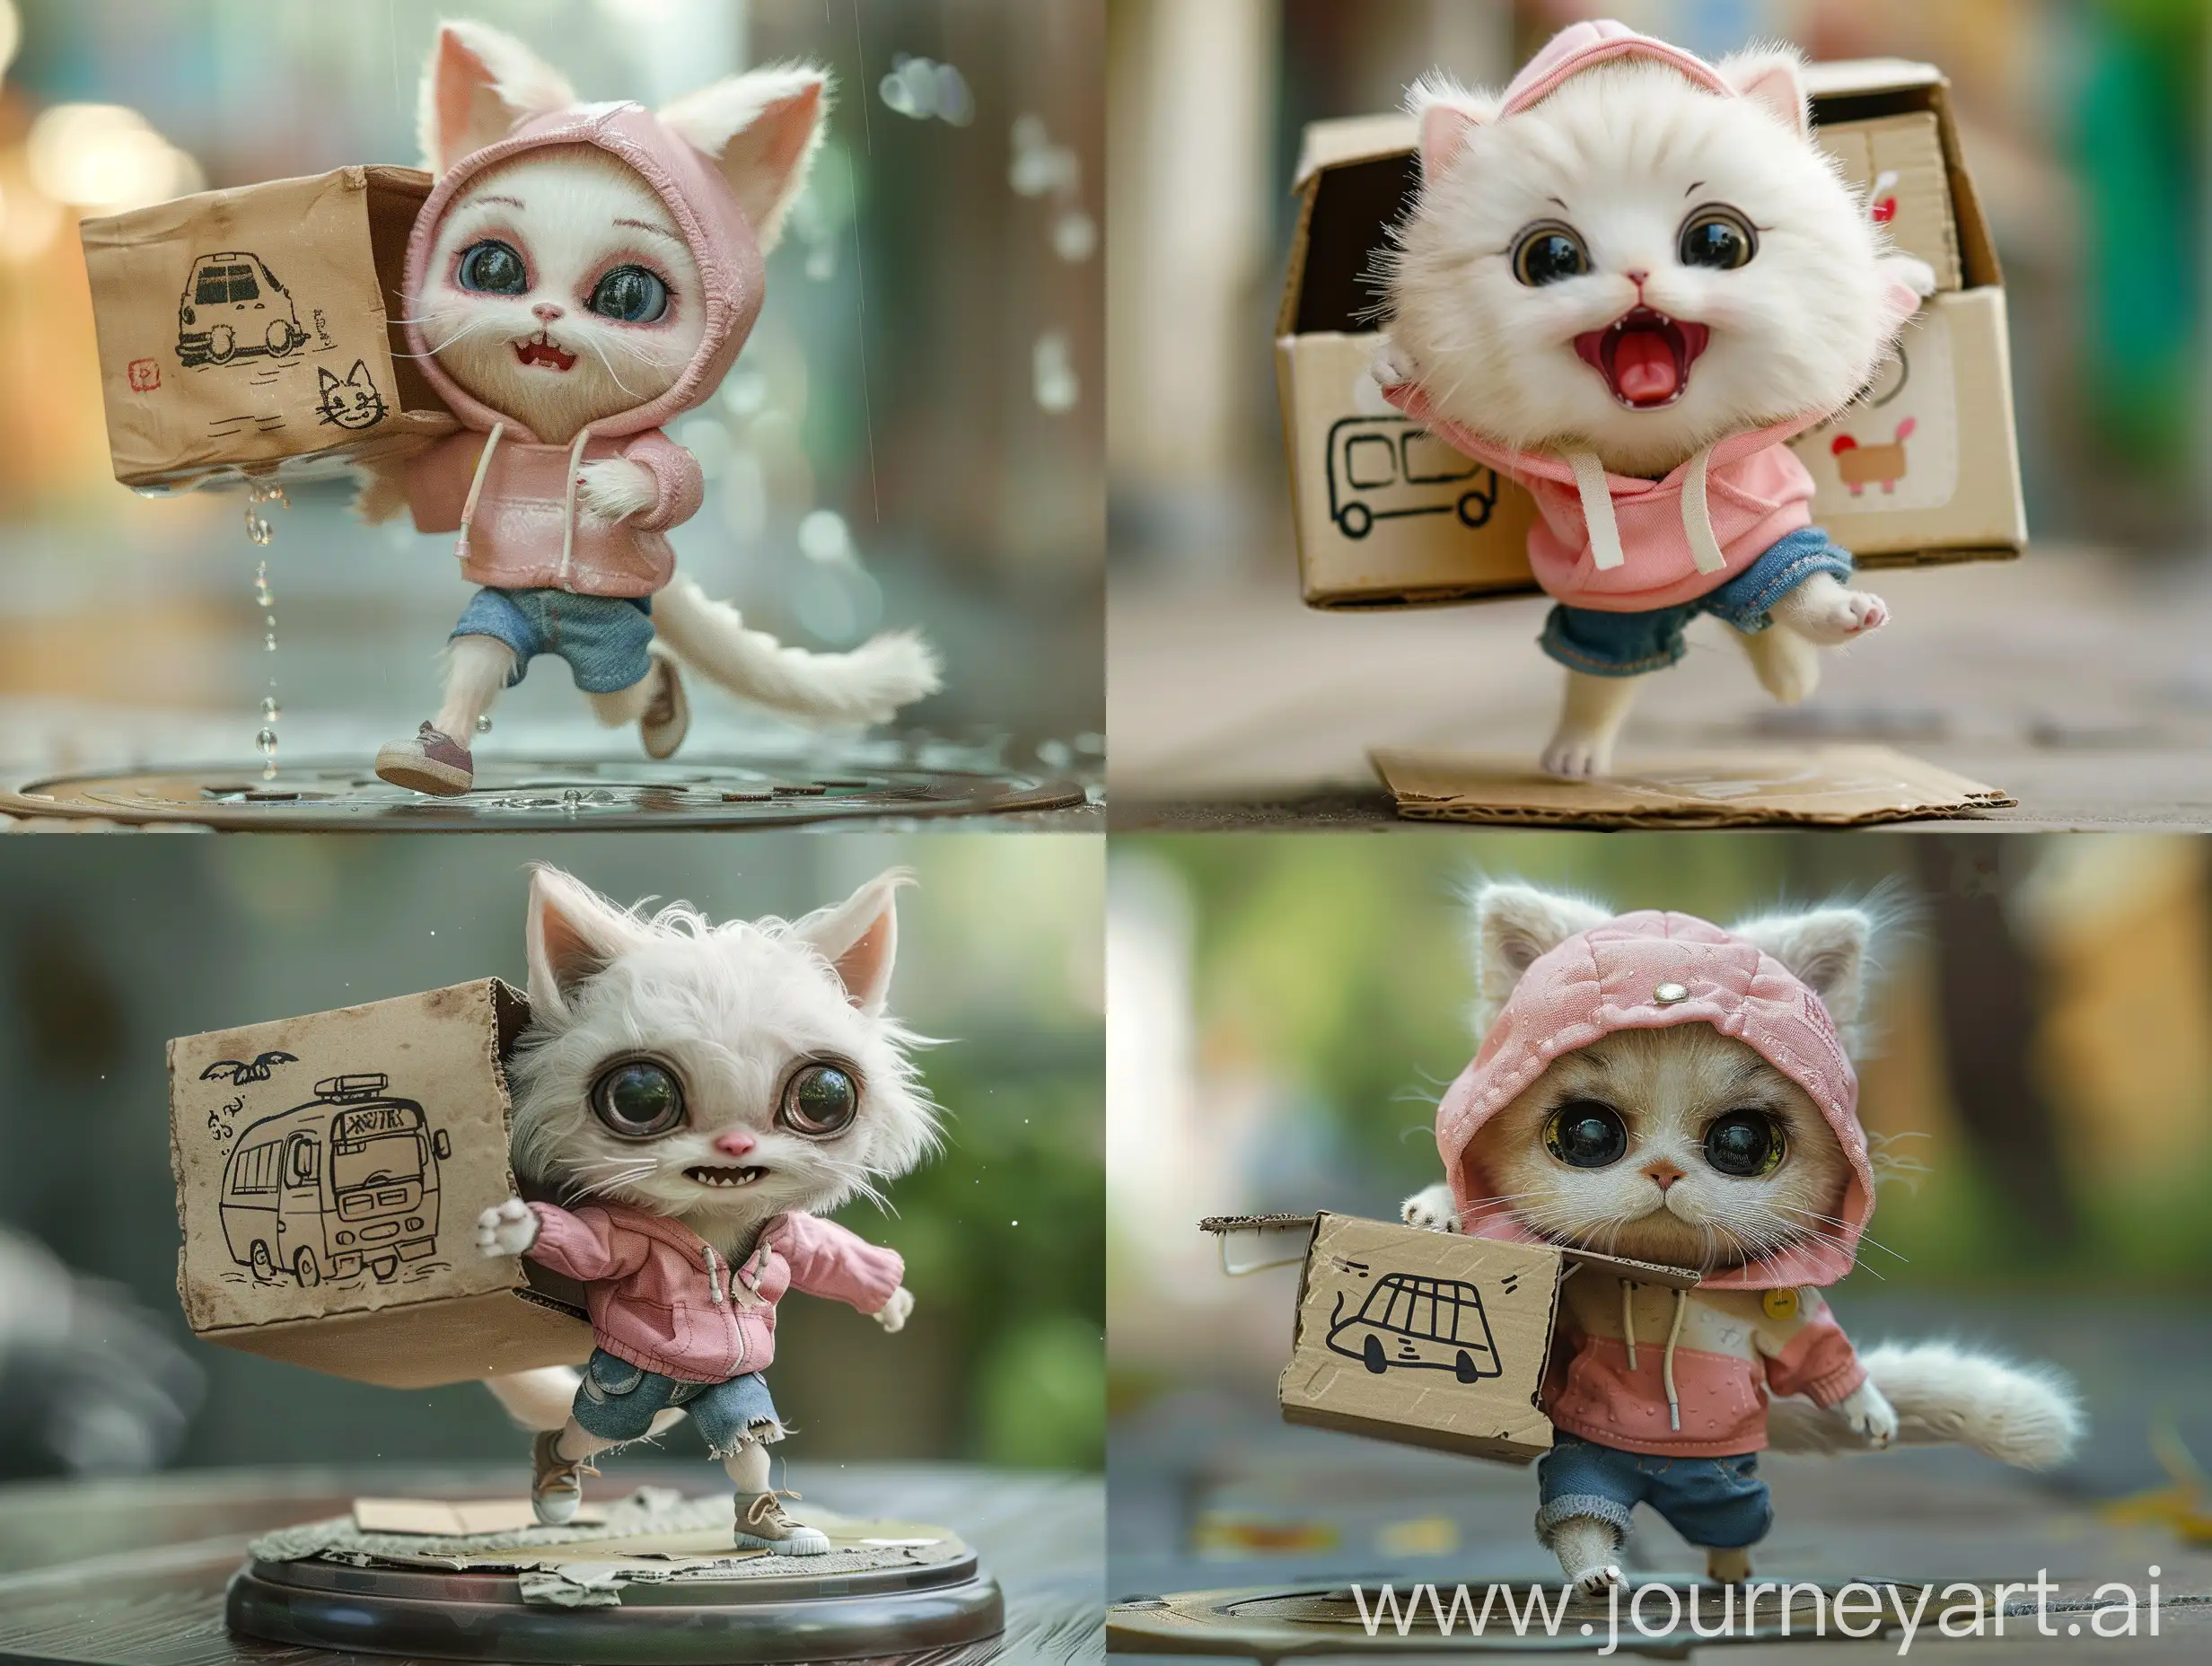 Prompt: A highly detailed, hyper-realistic photograph of a scale model figure, Super cute little kitten (white flur) with big expressive eyes, wears a pink hoody and shorts blue jeans. she put the cardboard box over the head, ranning and laughing, A childlike illustration of a bus is drawn on the outside of the cardboard box. The figure is designed in a stylized, animated manner, The base of the model is a simple round platform, and the background is blurred to keep focus on the figure. The lighting enhances the textures and colors, highlighting the craftsmanship and character of the model
